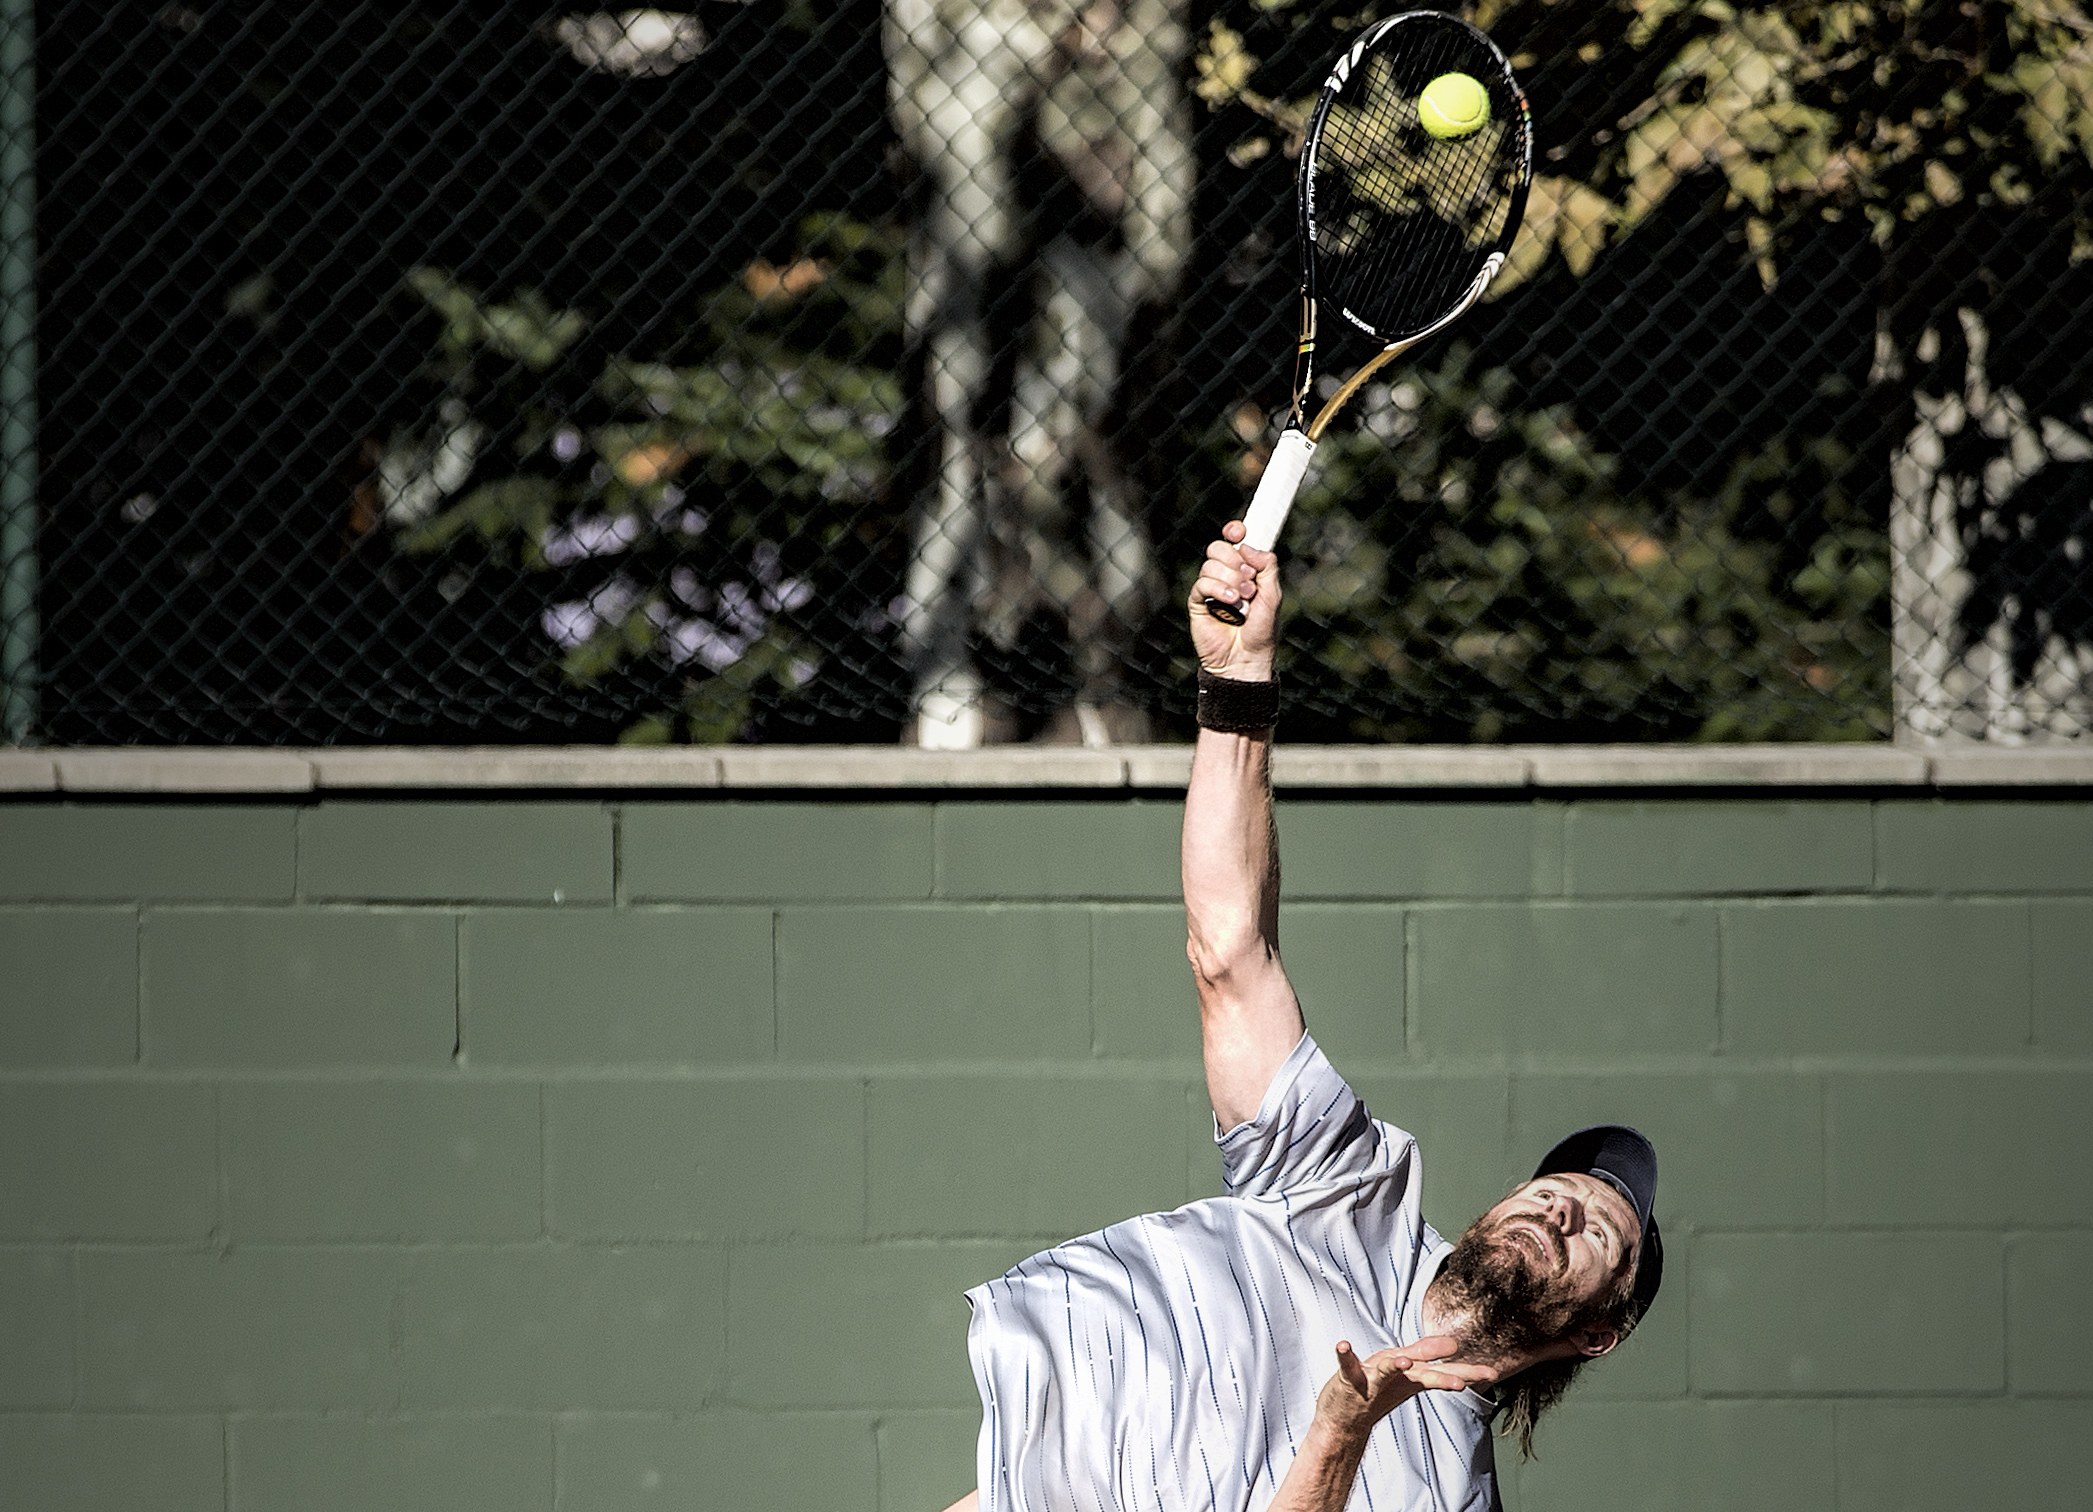 How to Improve Your Tennis Serve